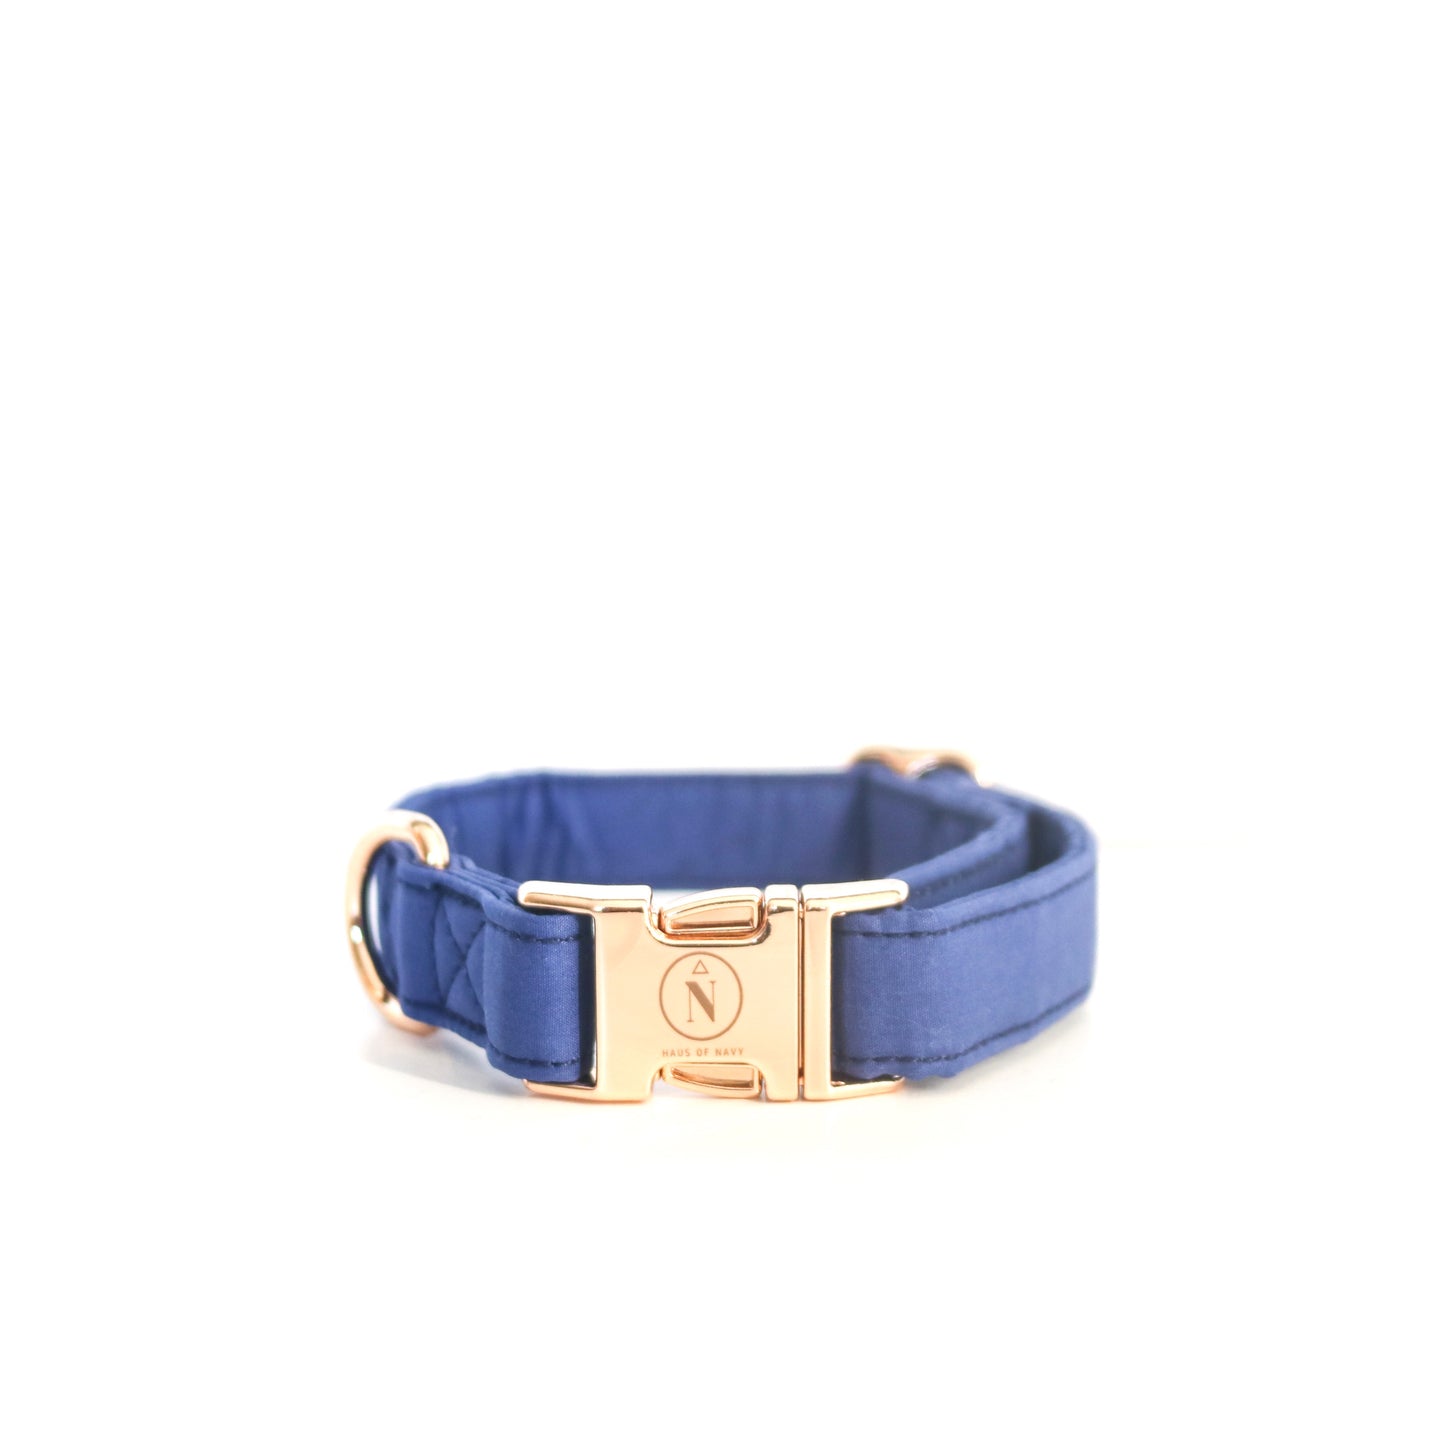 Cotton Collar - Truly Navy